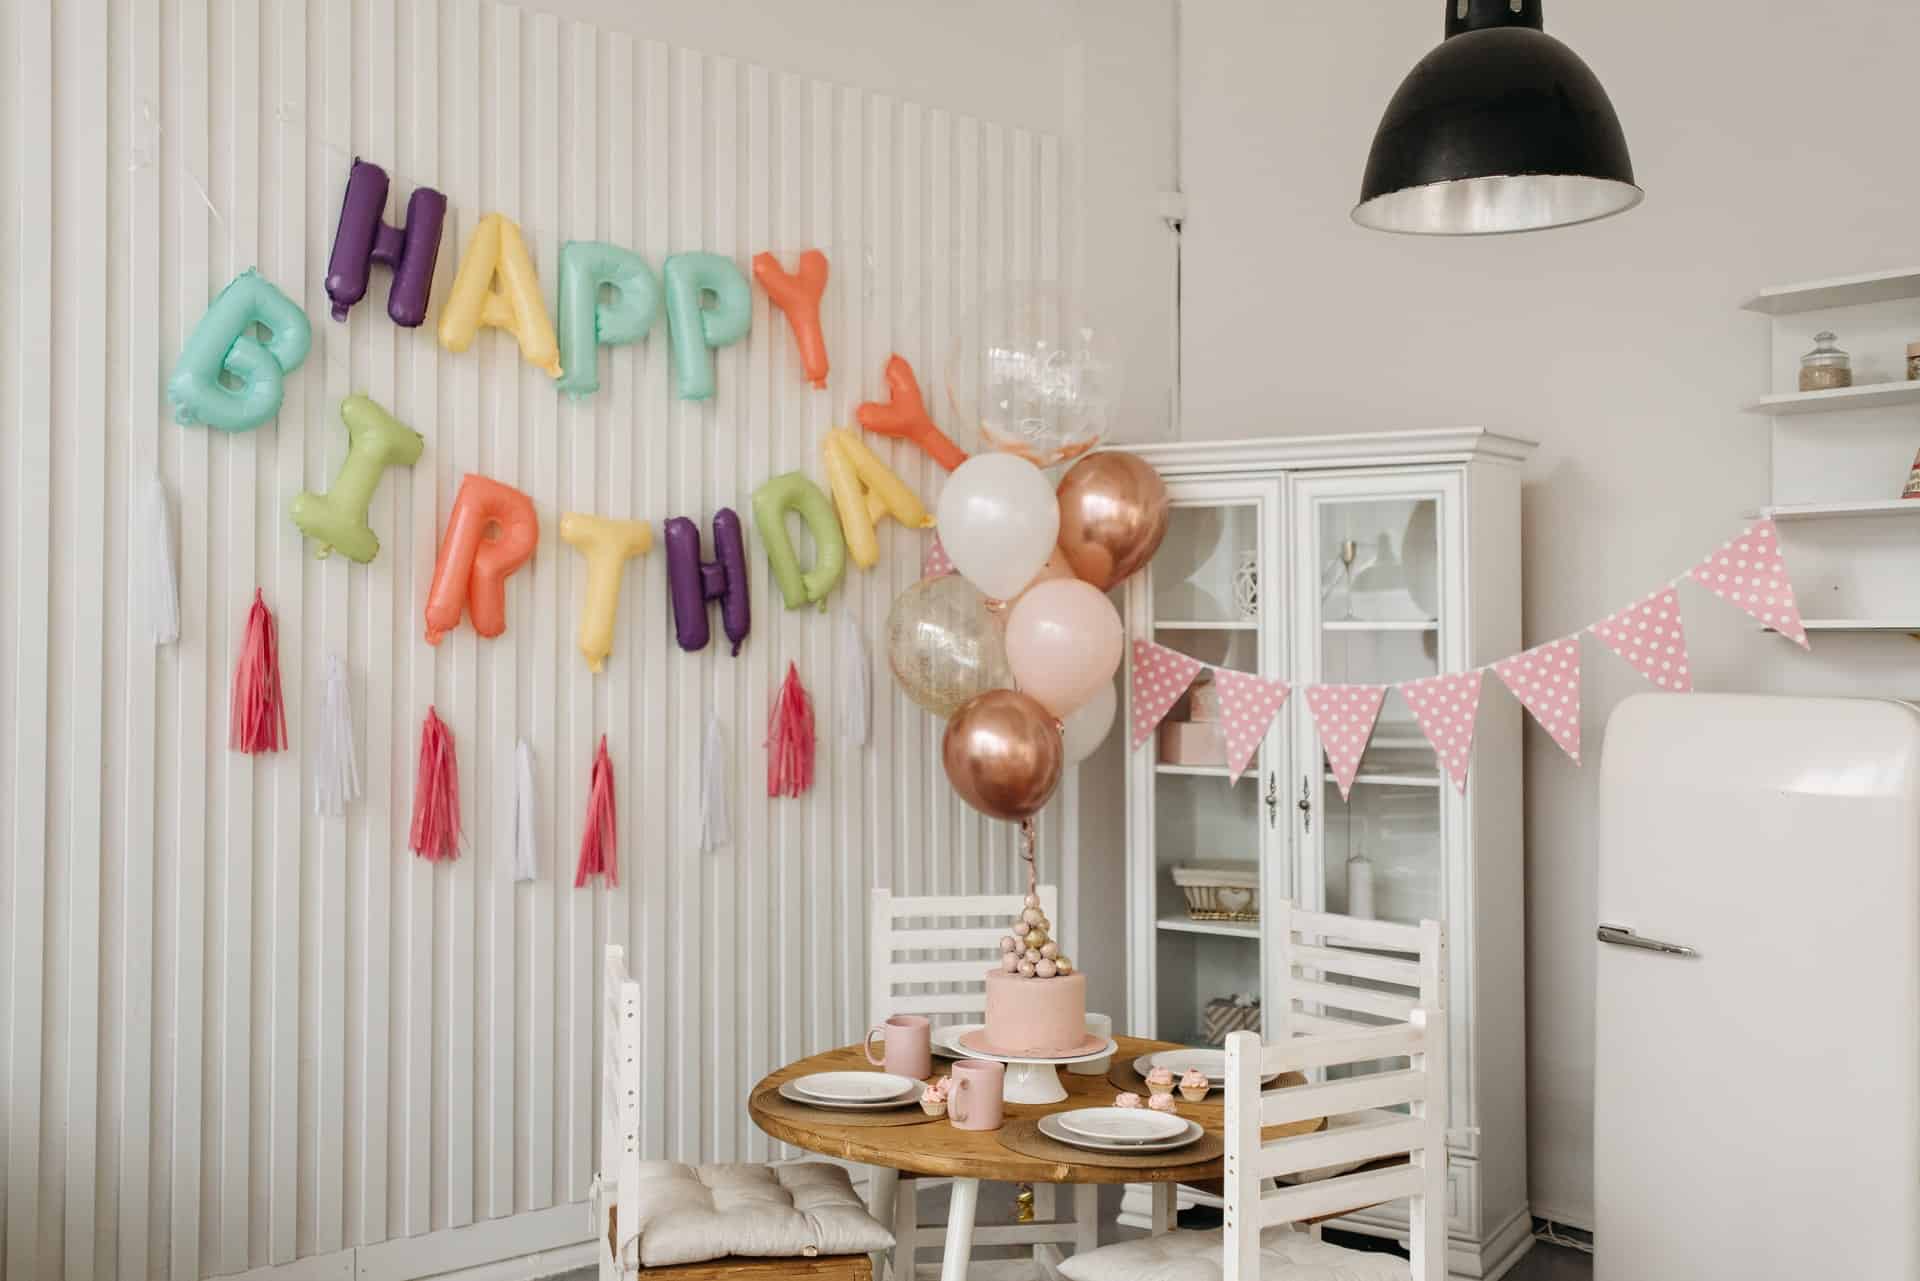 11 Memorable 31st Birthday Ideas To Make This Year Special - Peerspace